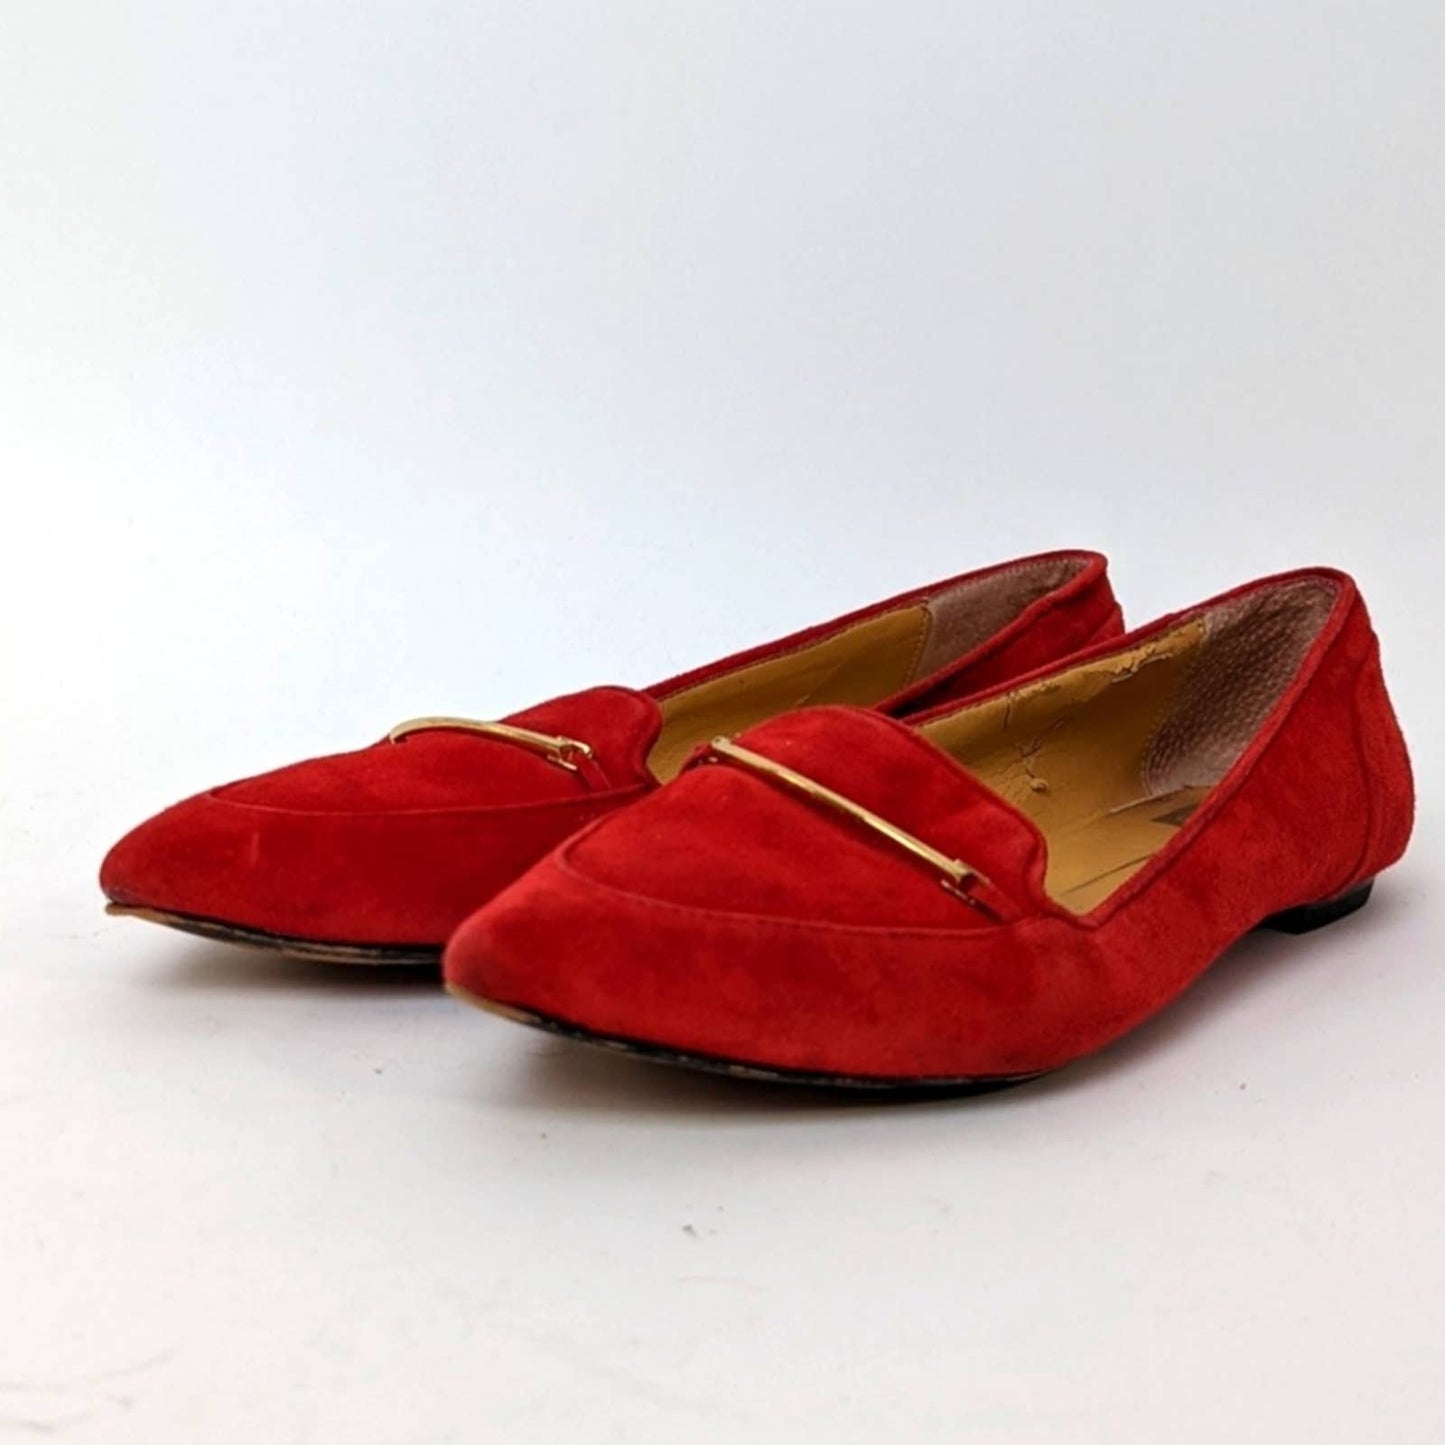 Dolce Vita Red Point Toe Sued Ballet Flats - 7